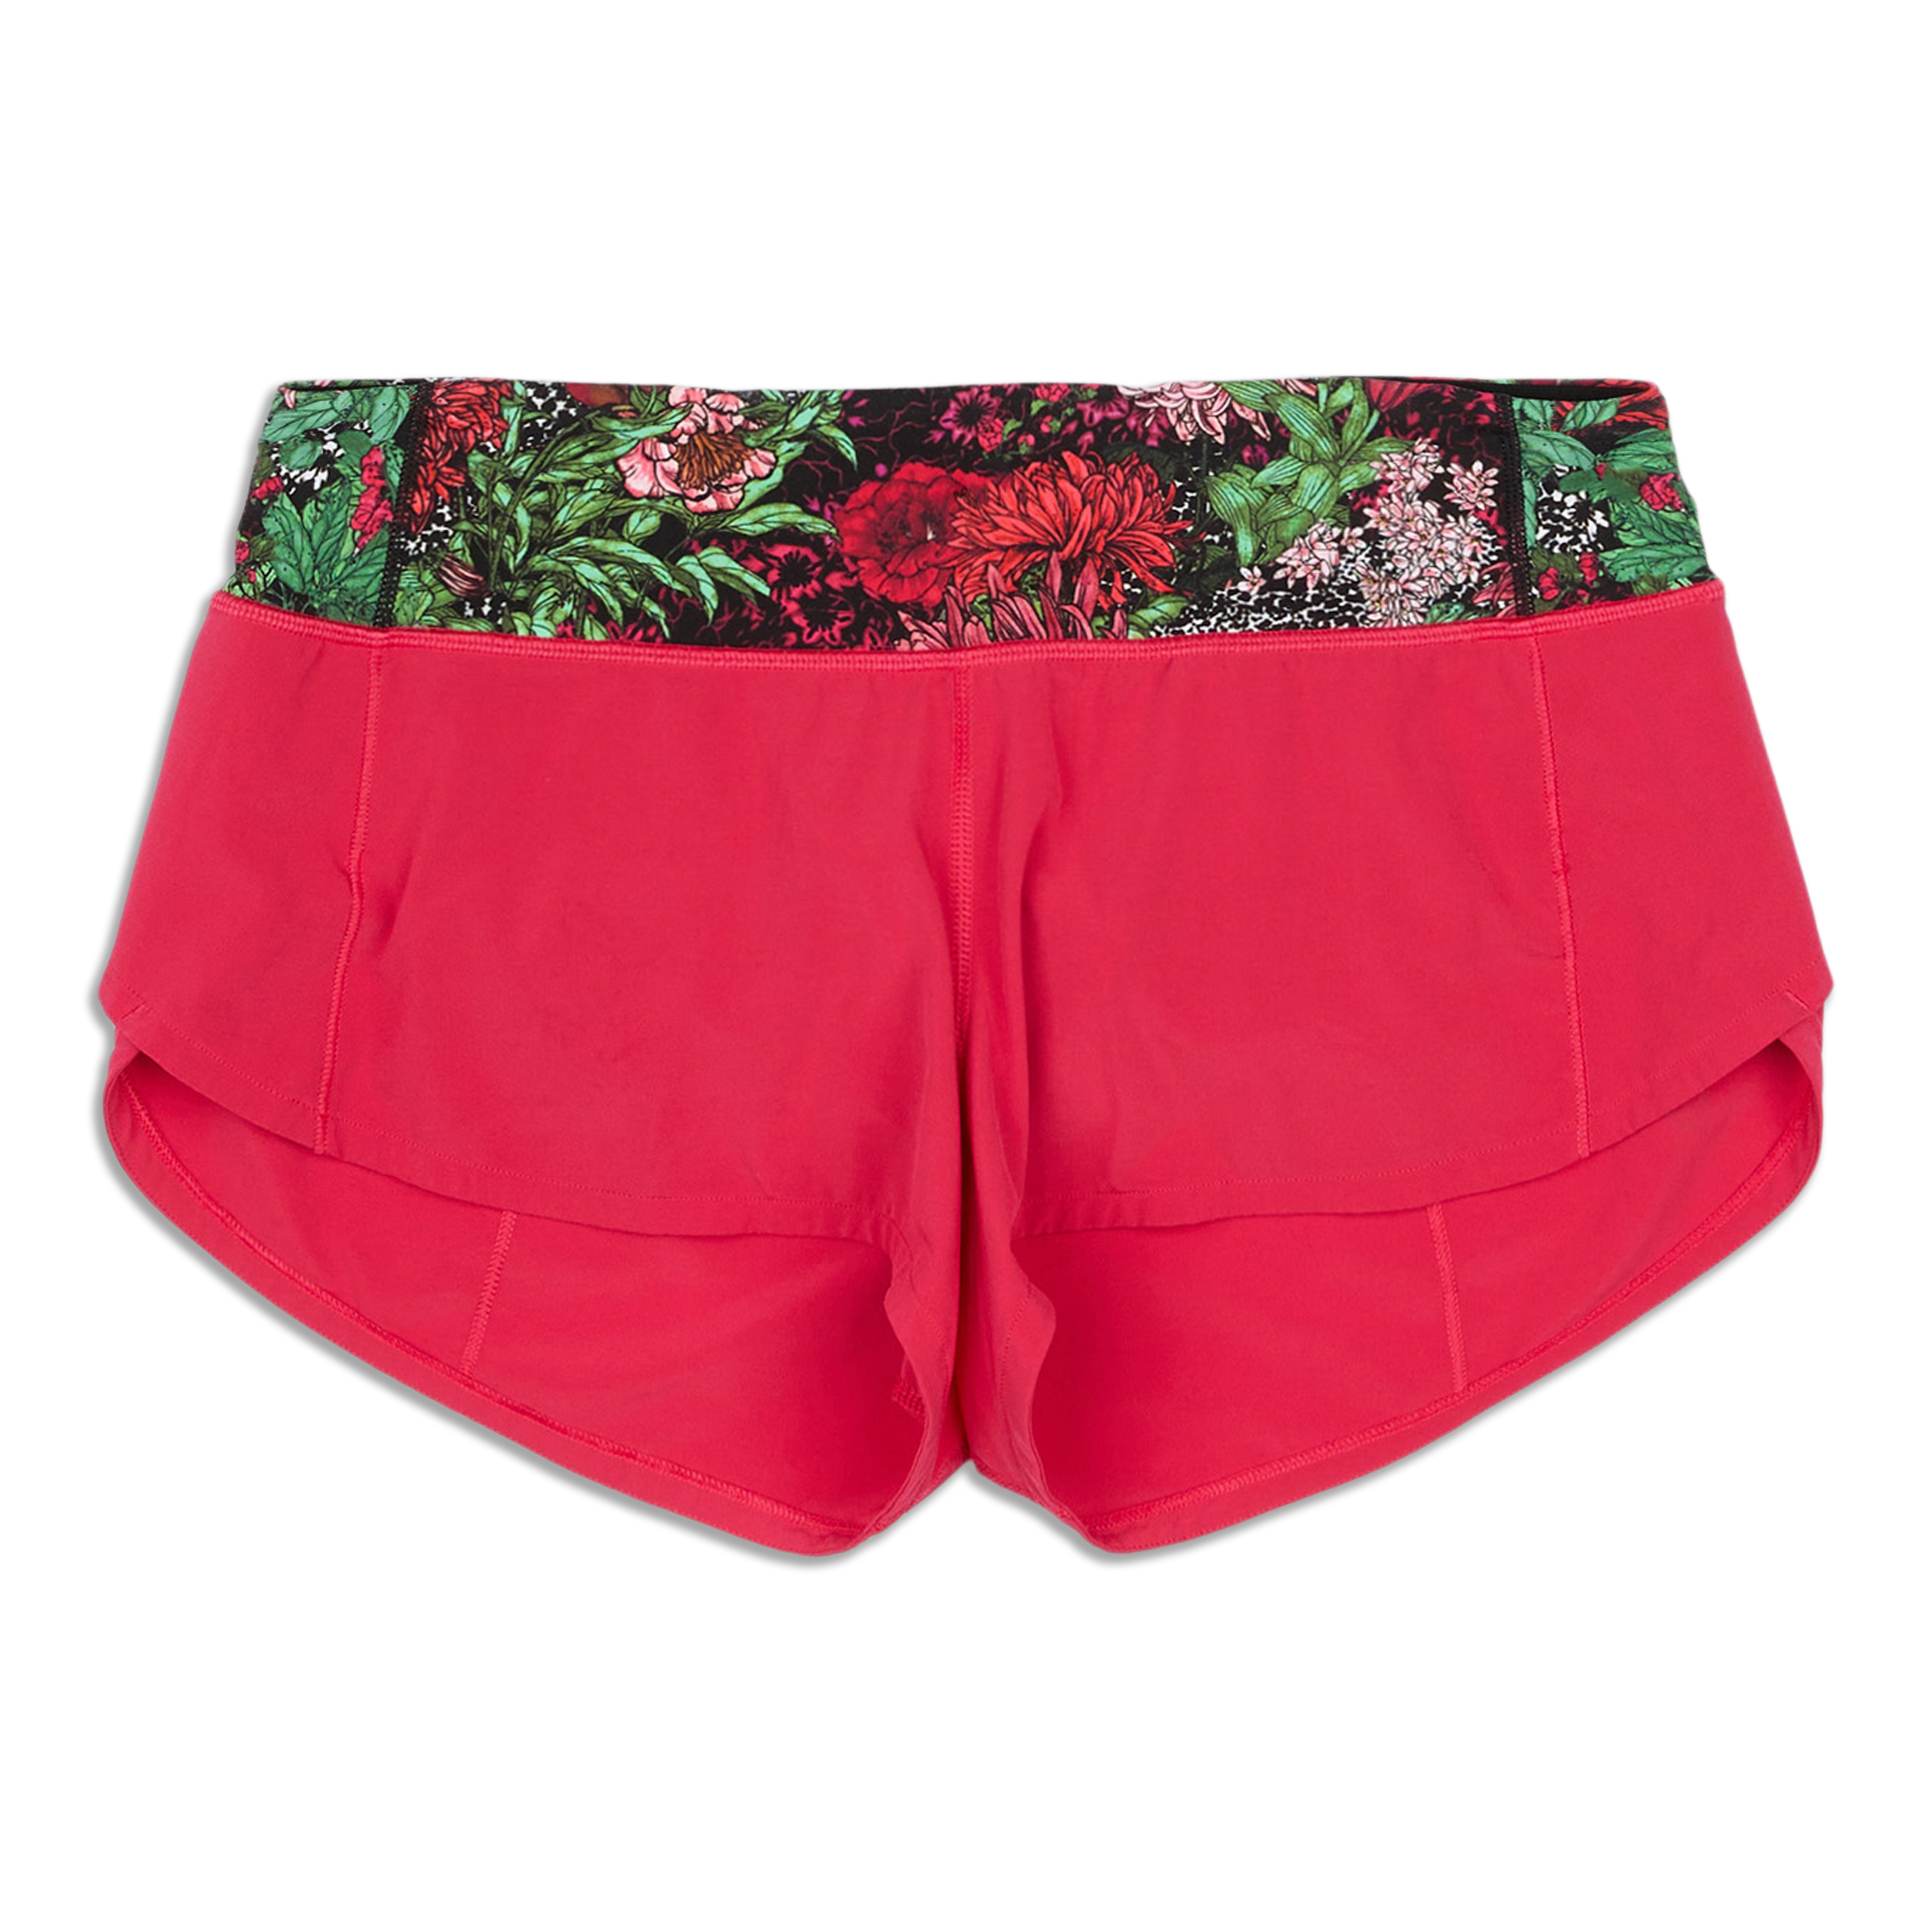 Lululemon Red Speed Up Shorts Size 6 - $50 (13% Off Retail) - From riley